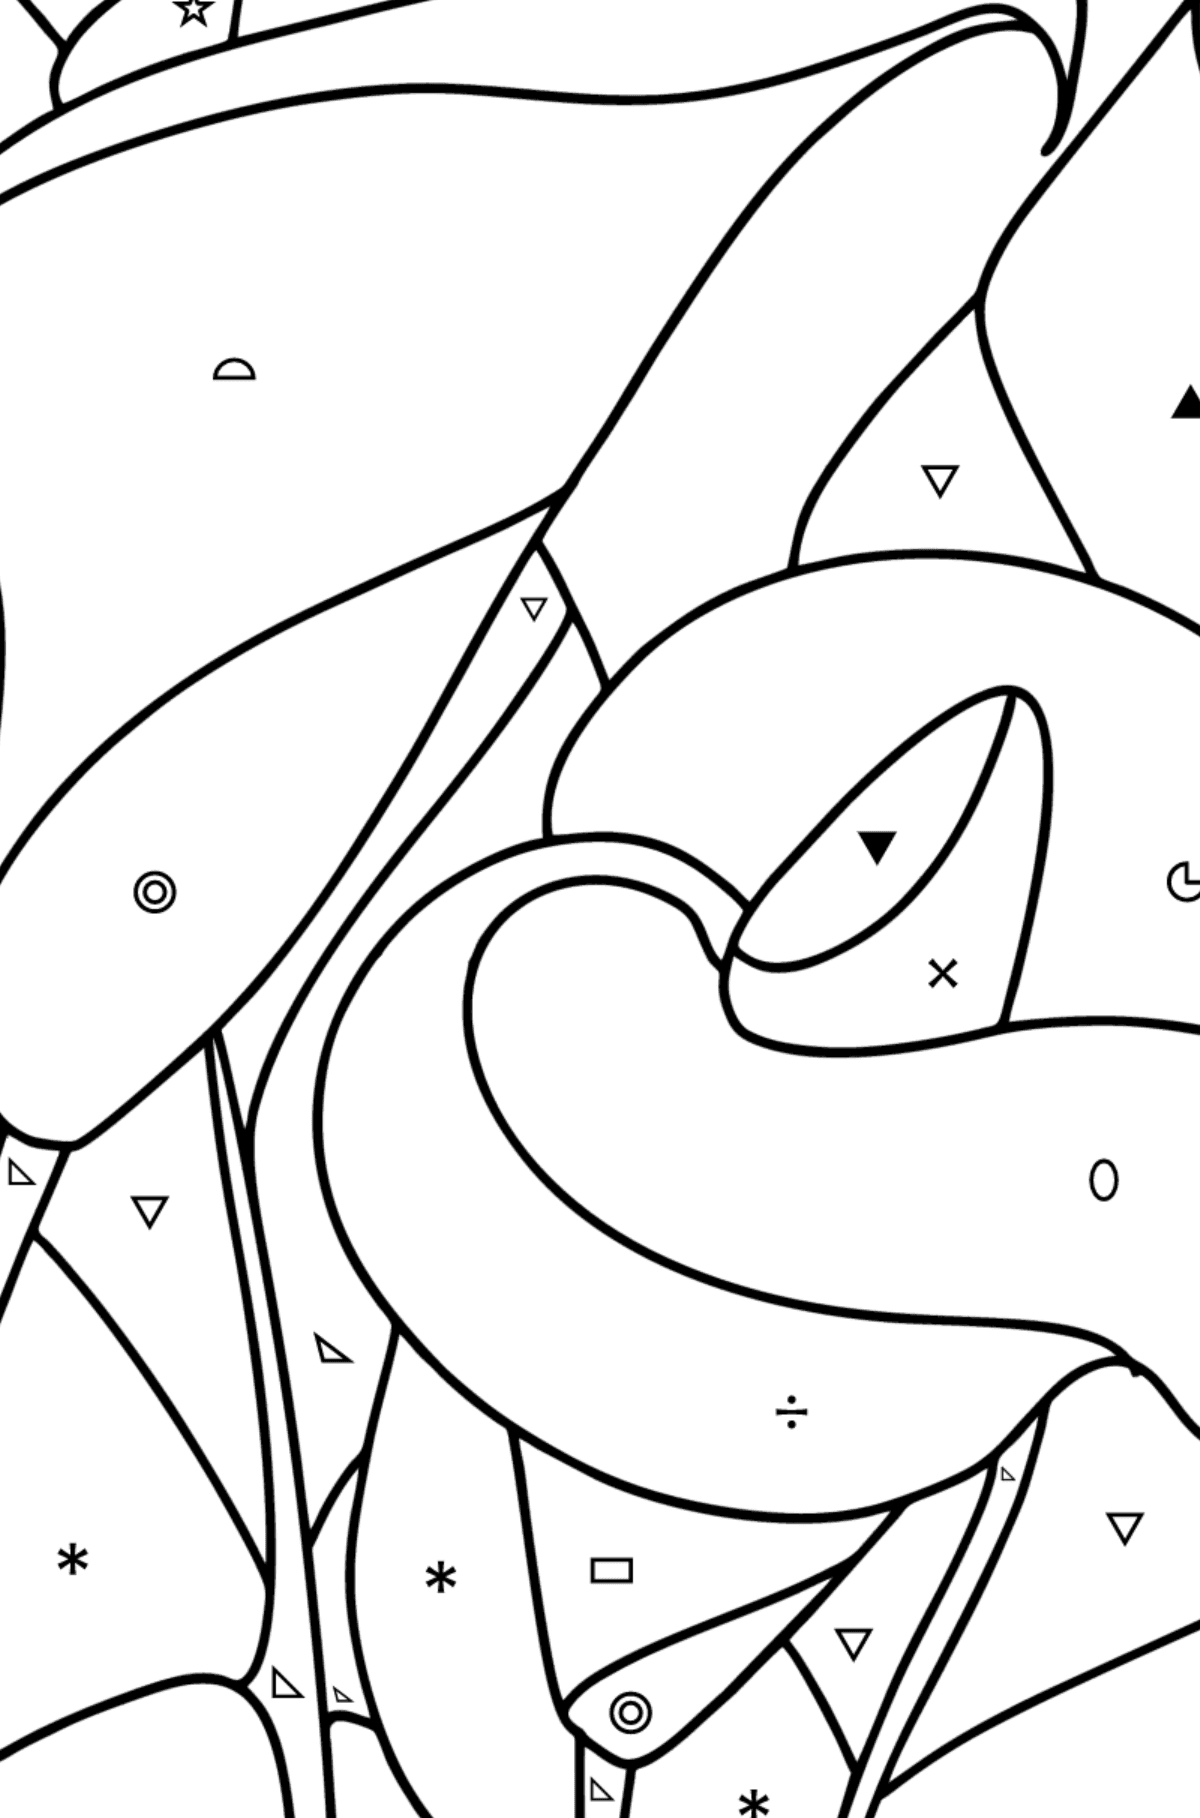 Calla coloring page - Coloring by Symbols and Geometric Shapes for Kids